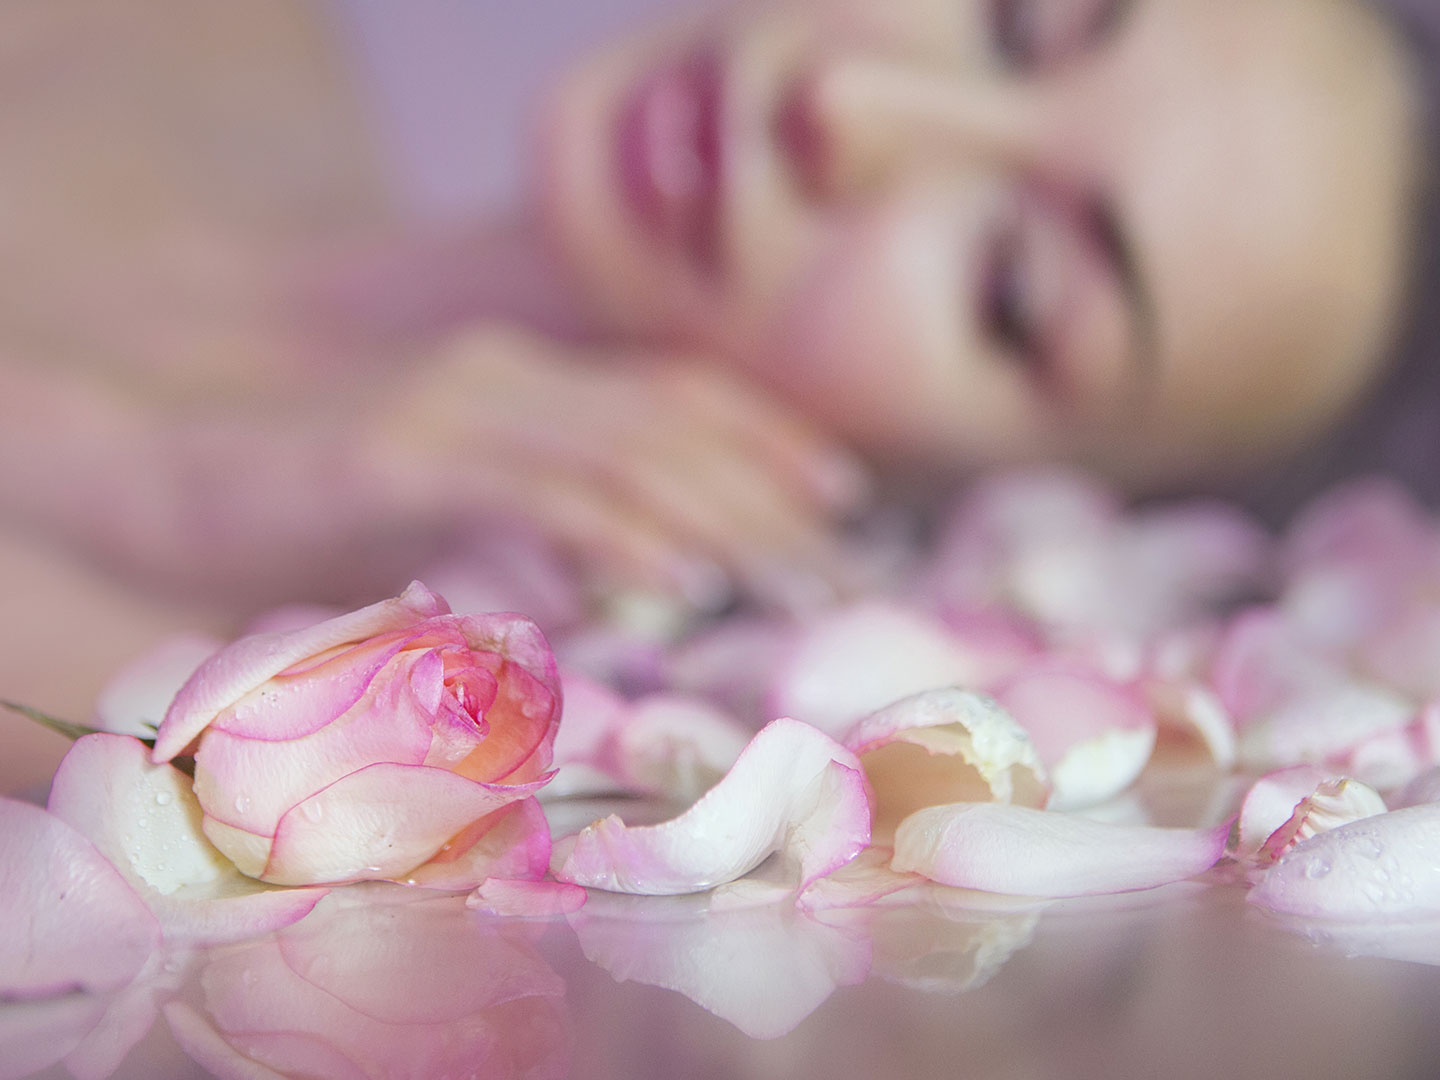 How to use rosewater for acne